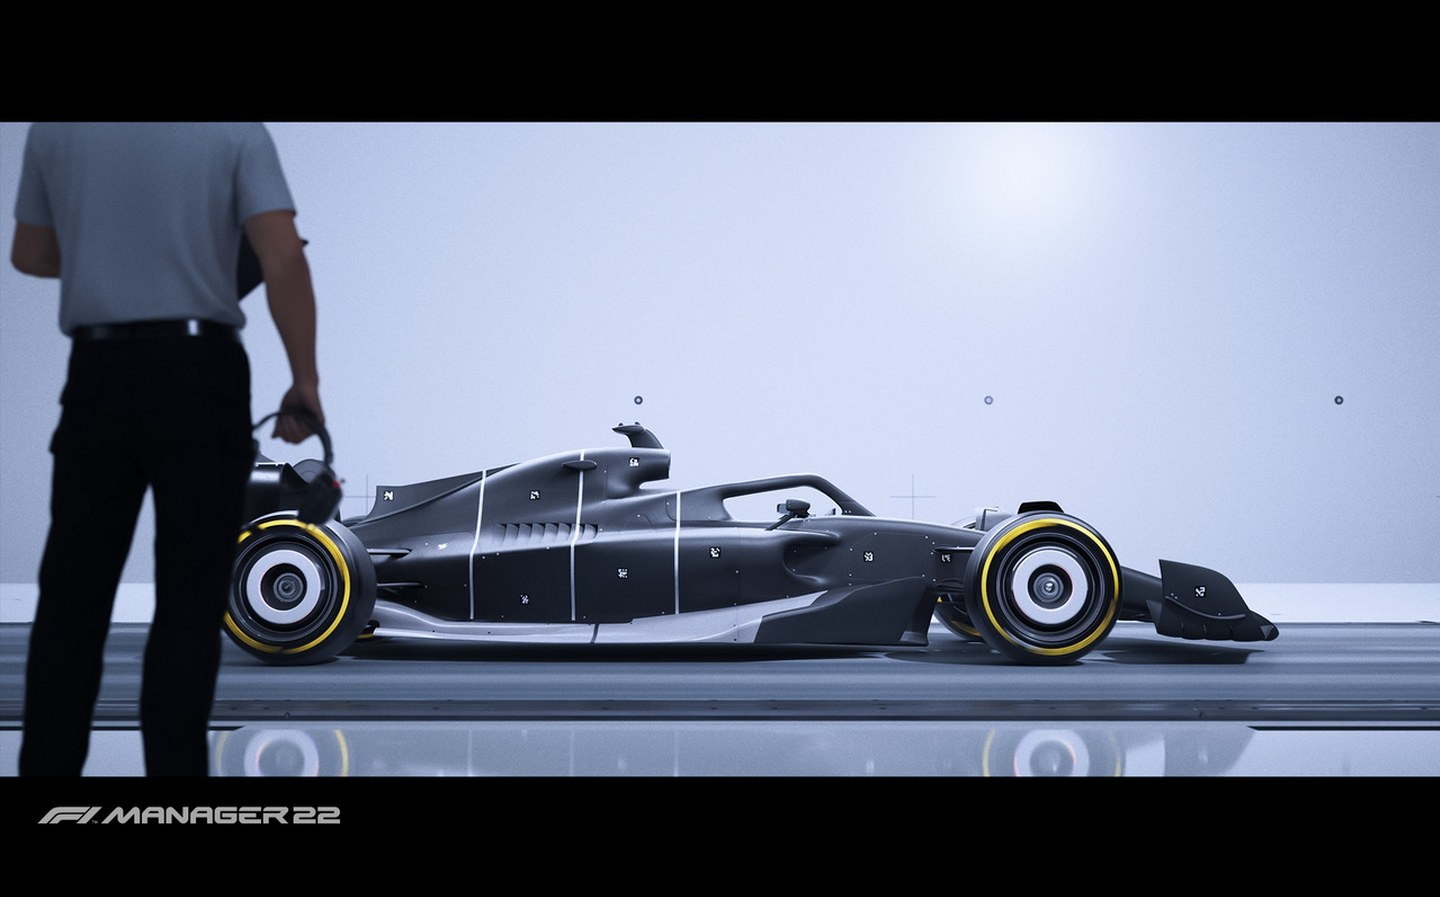 F1 Manager 2022 by Frontier Developments